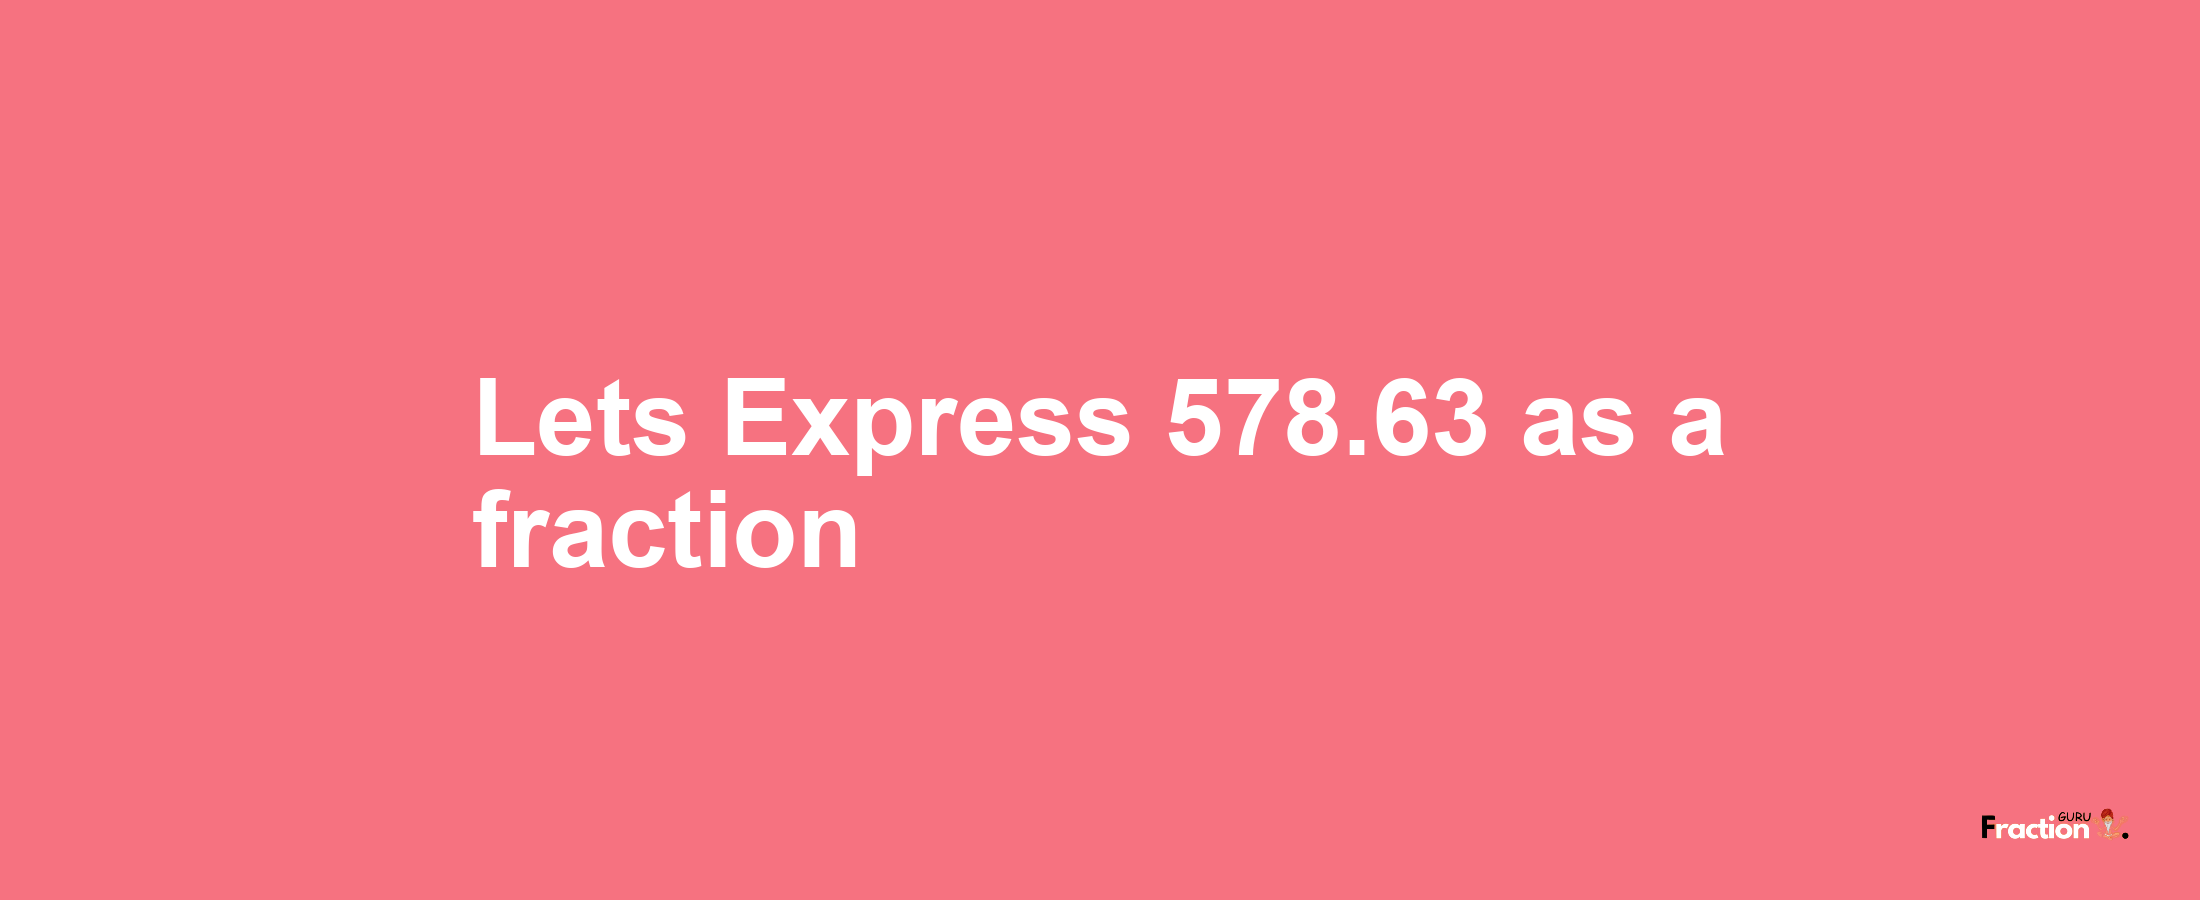 Lets Express 578.63 as afraction